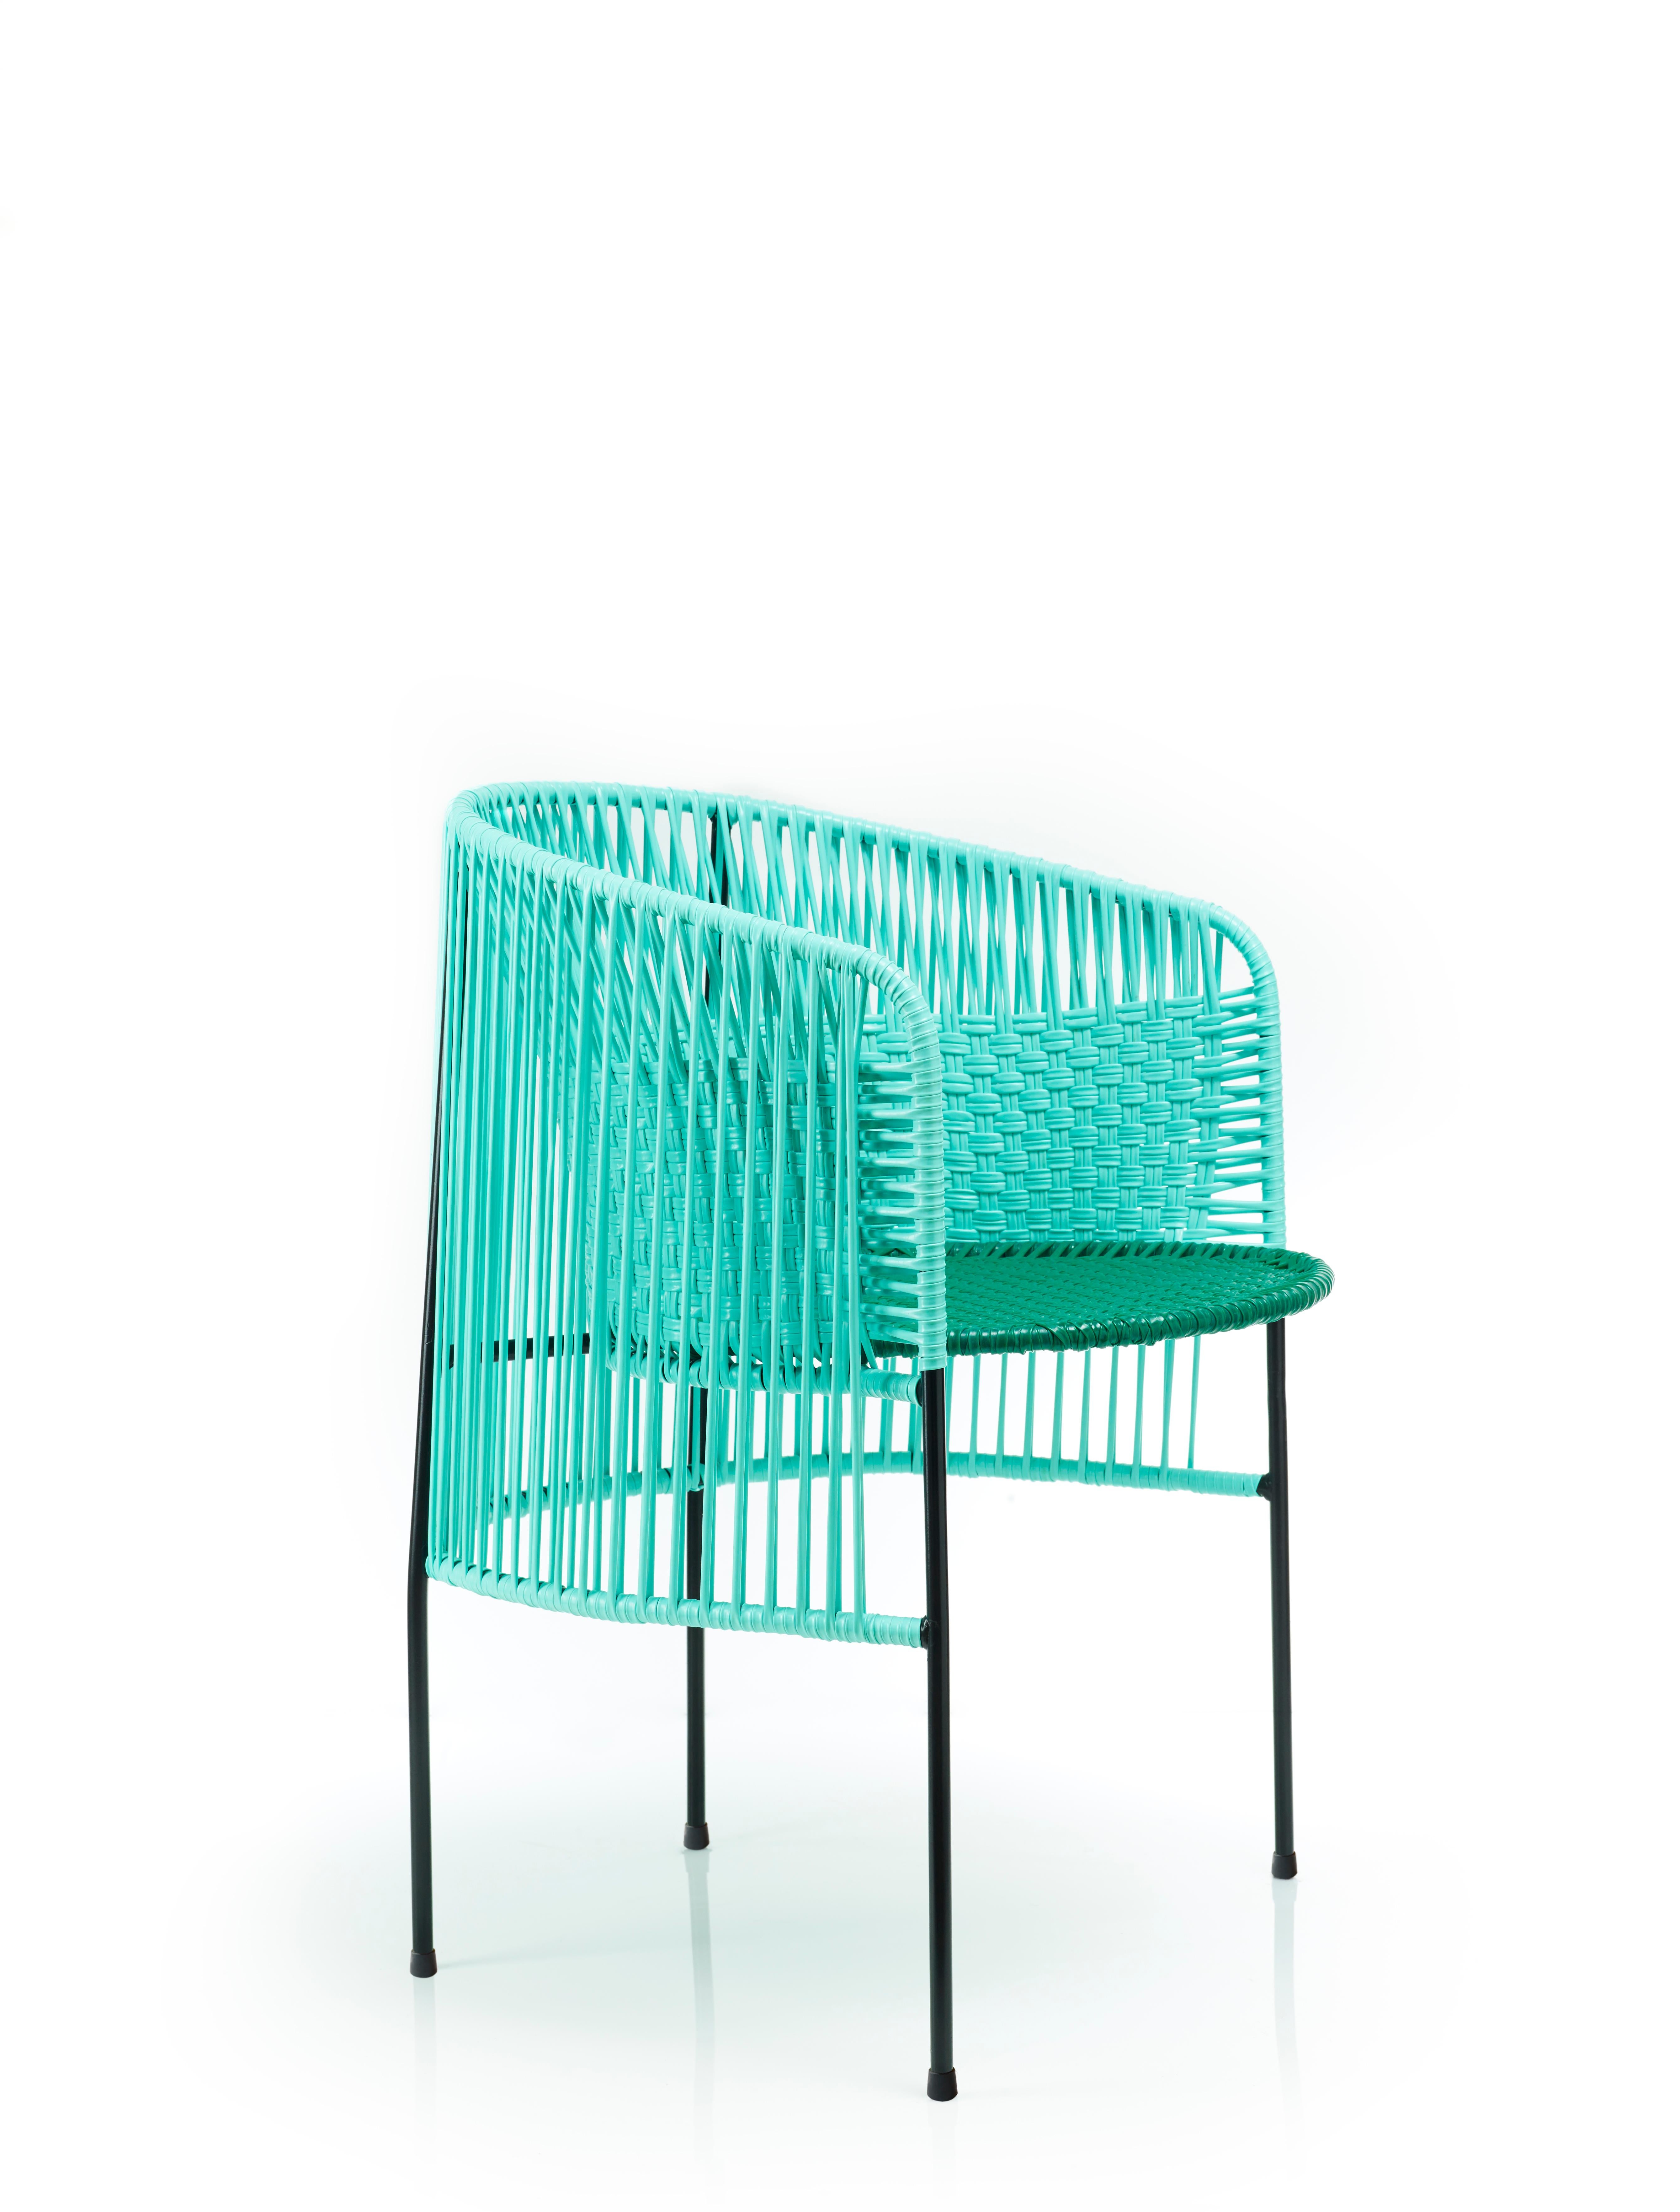 Set of 4 Mint caribe dining chair by Sebastian Herkner
Materials: Galvanized and powder-coated tubular steel. PVC strings are made from recycled plastic.
Technique: Made from recycled plastic and weaved by local craftspeople in Colombia.